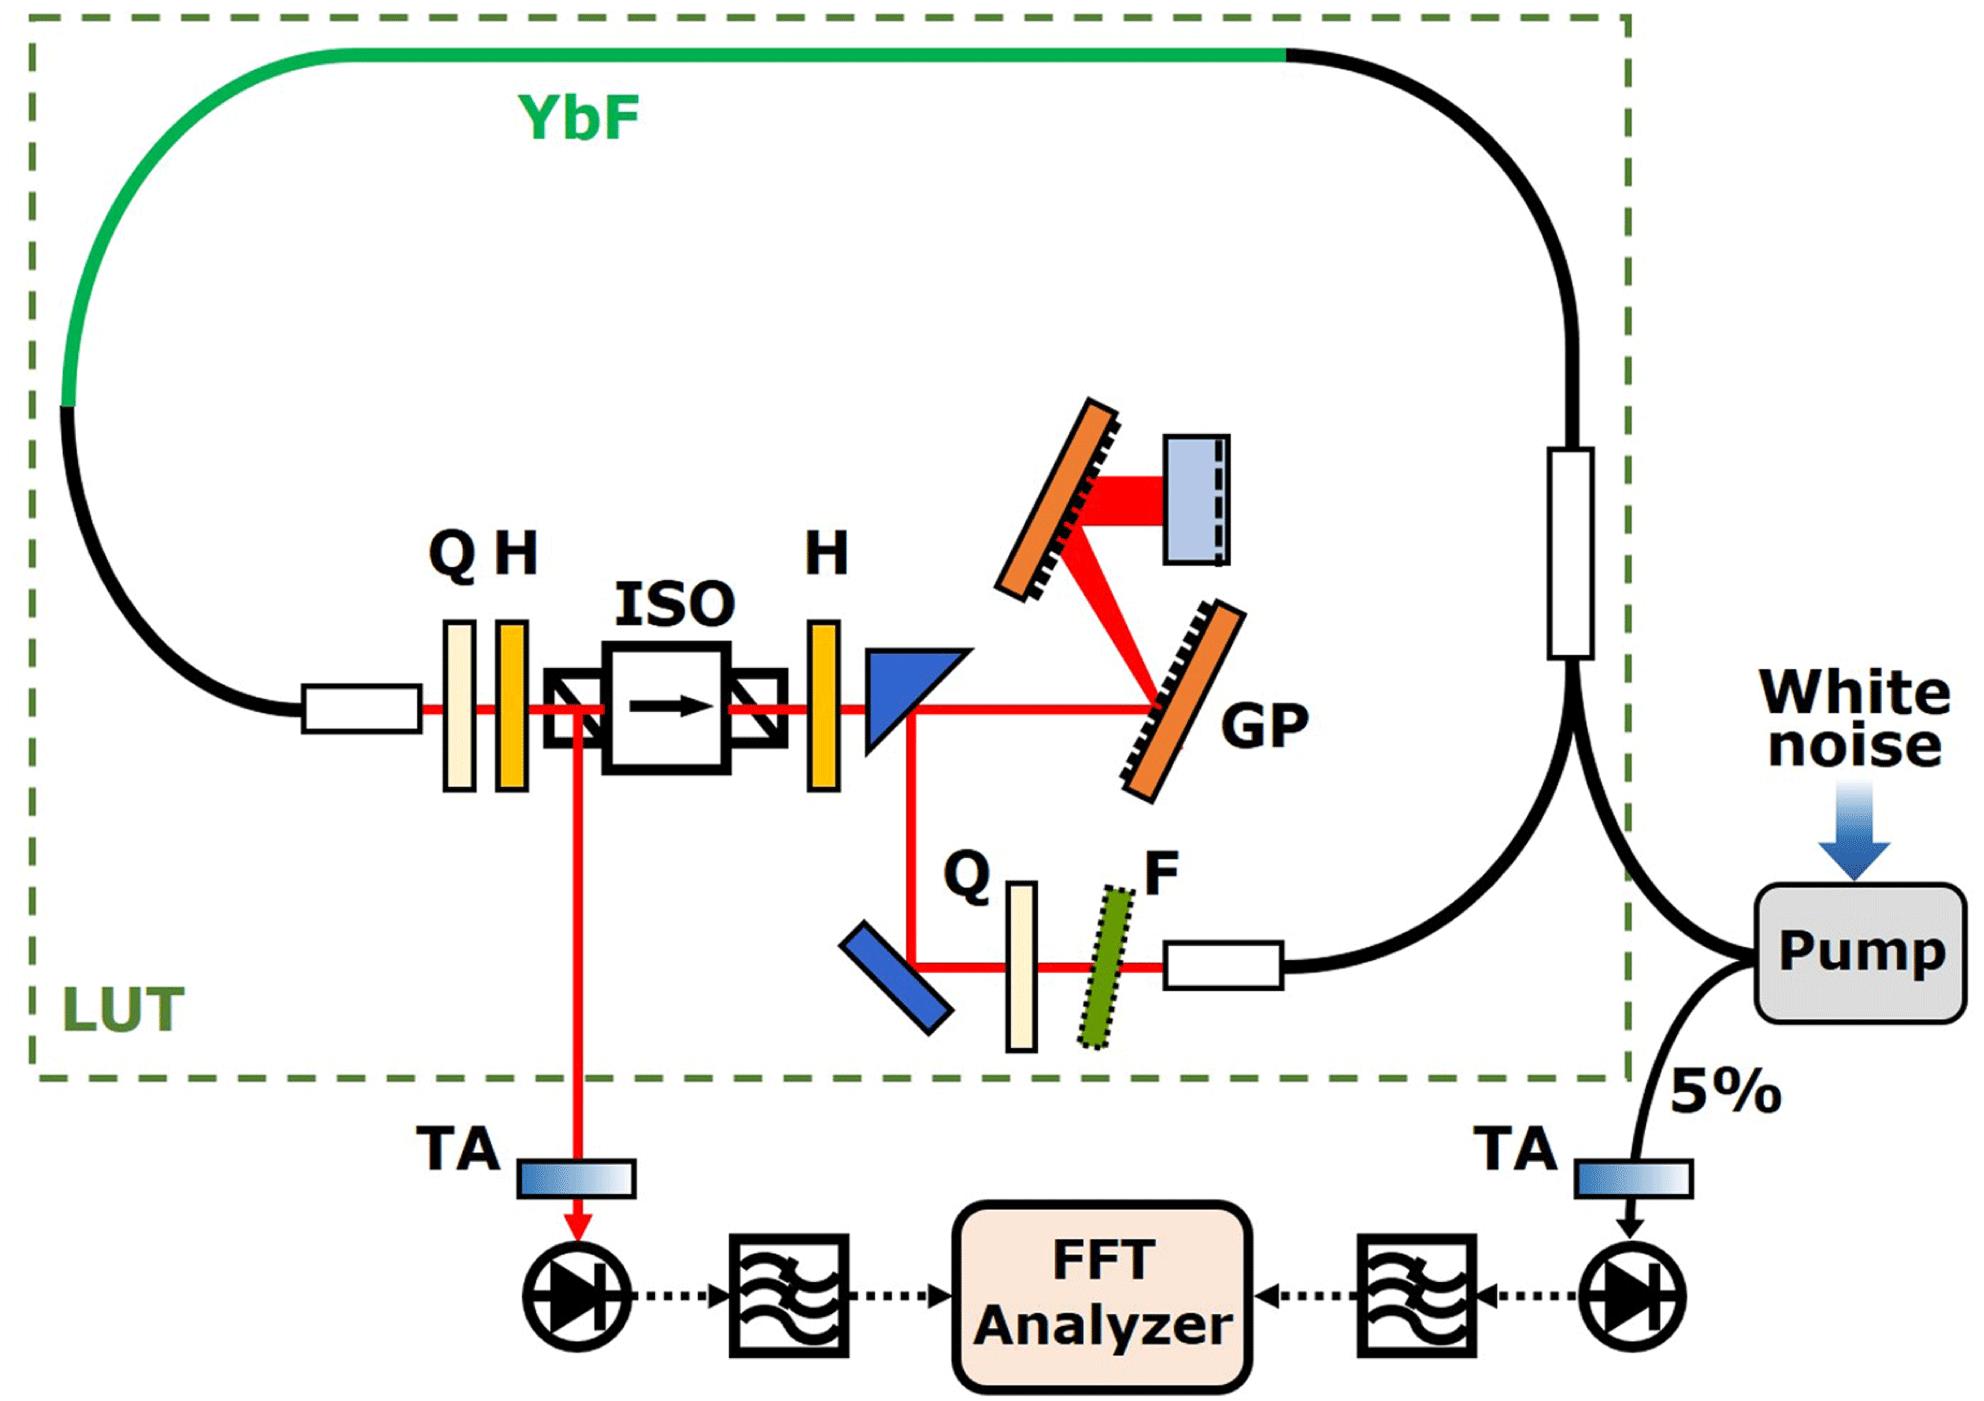 Configuration of the RIN transfer function characterization system. YbF, ytterbium-doped fiber; Q, quarter waveplate; H, half waveplate; ISO, isolator; F, band-pass filter; GP, grating pair; LUT, laser under test; TA, tunable attenuator.